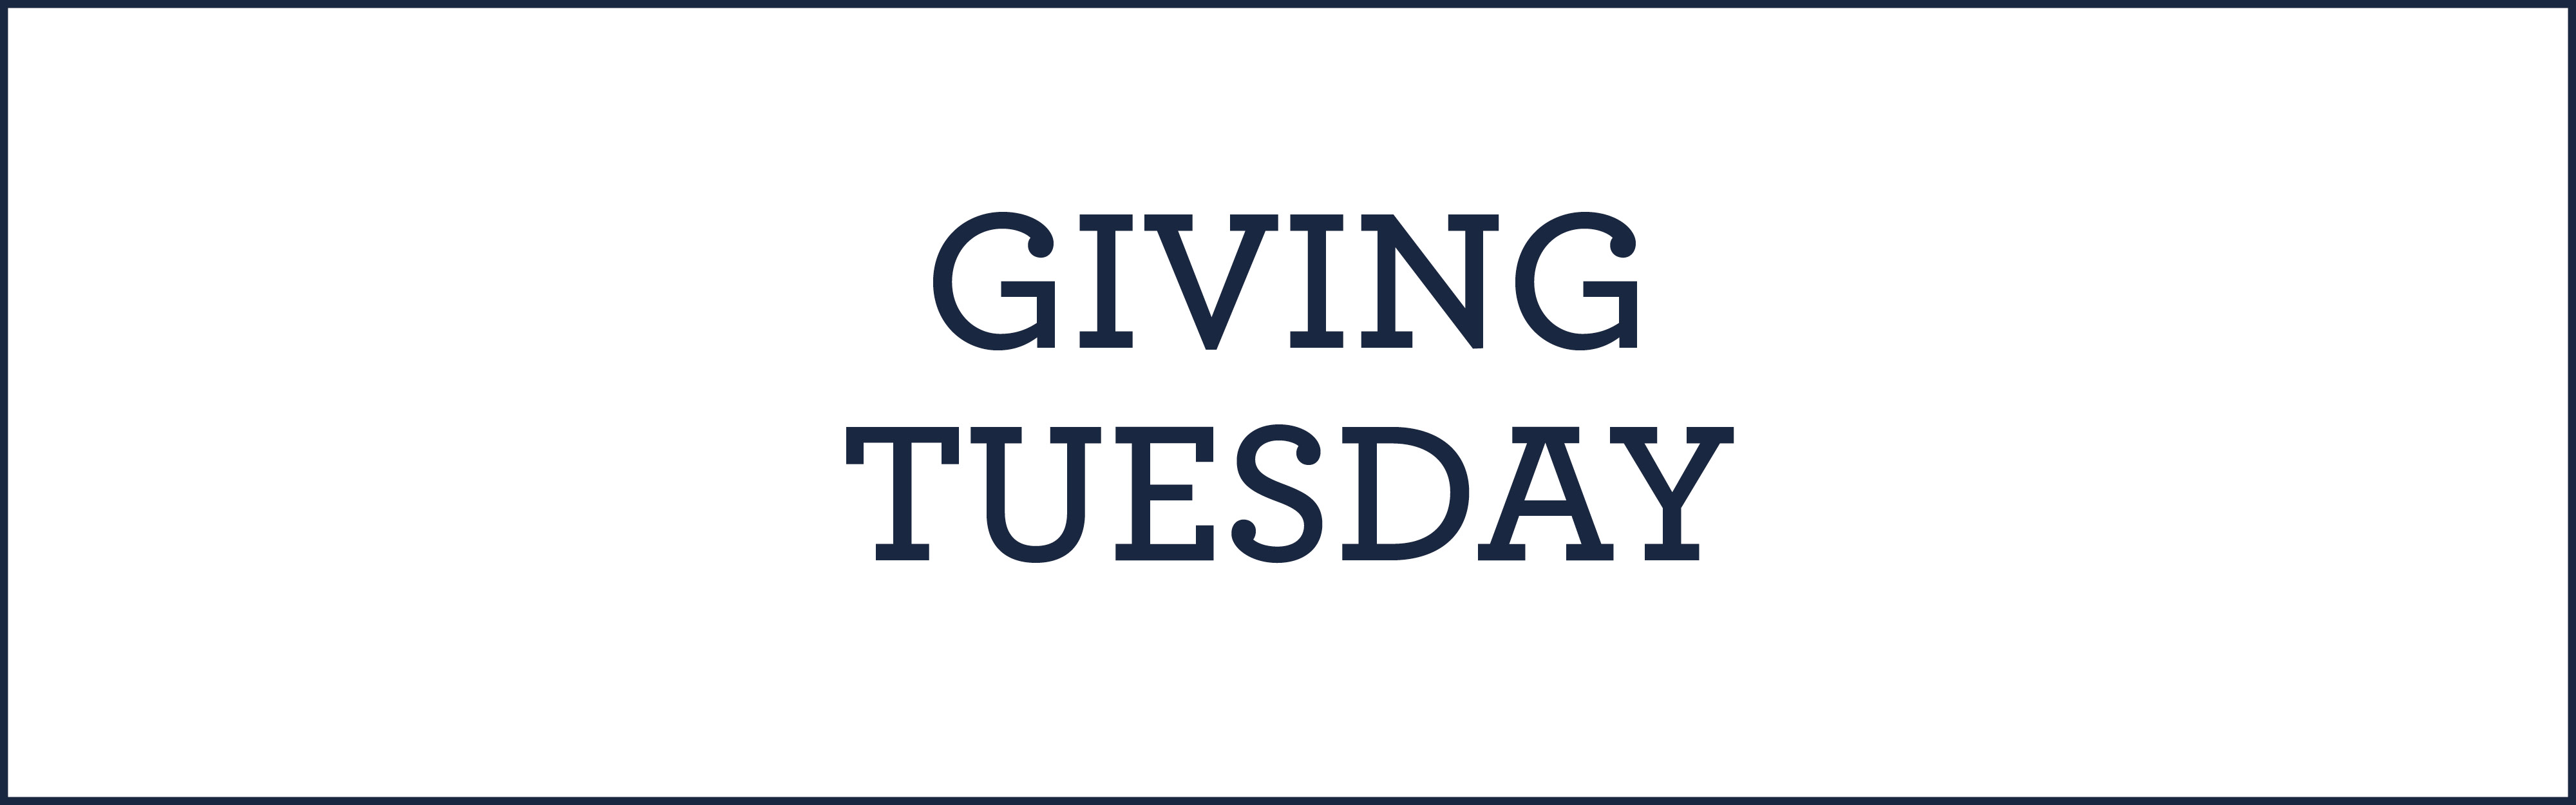 Giving tuesday event information